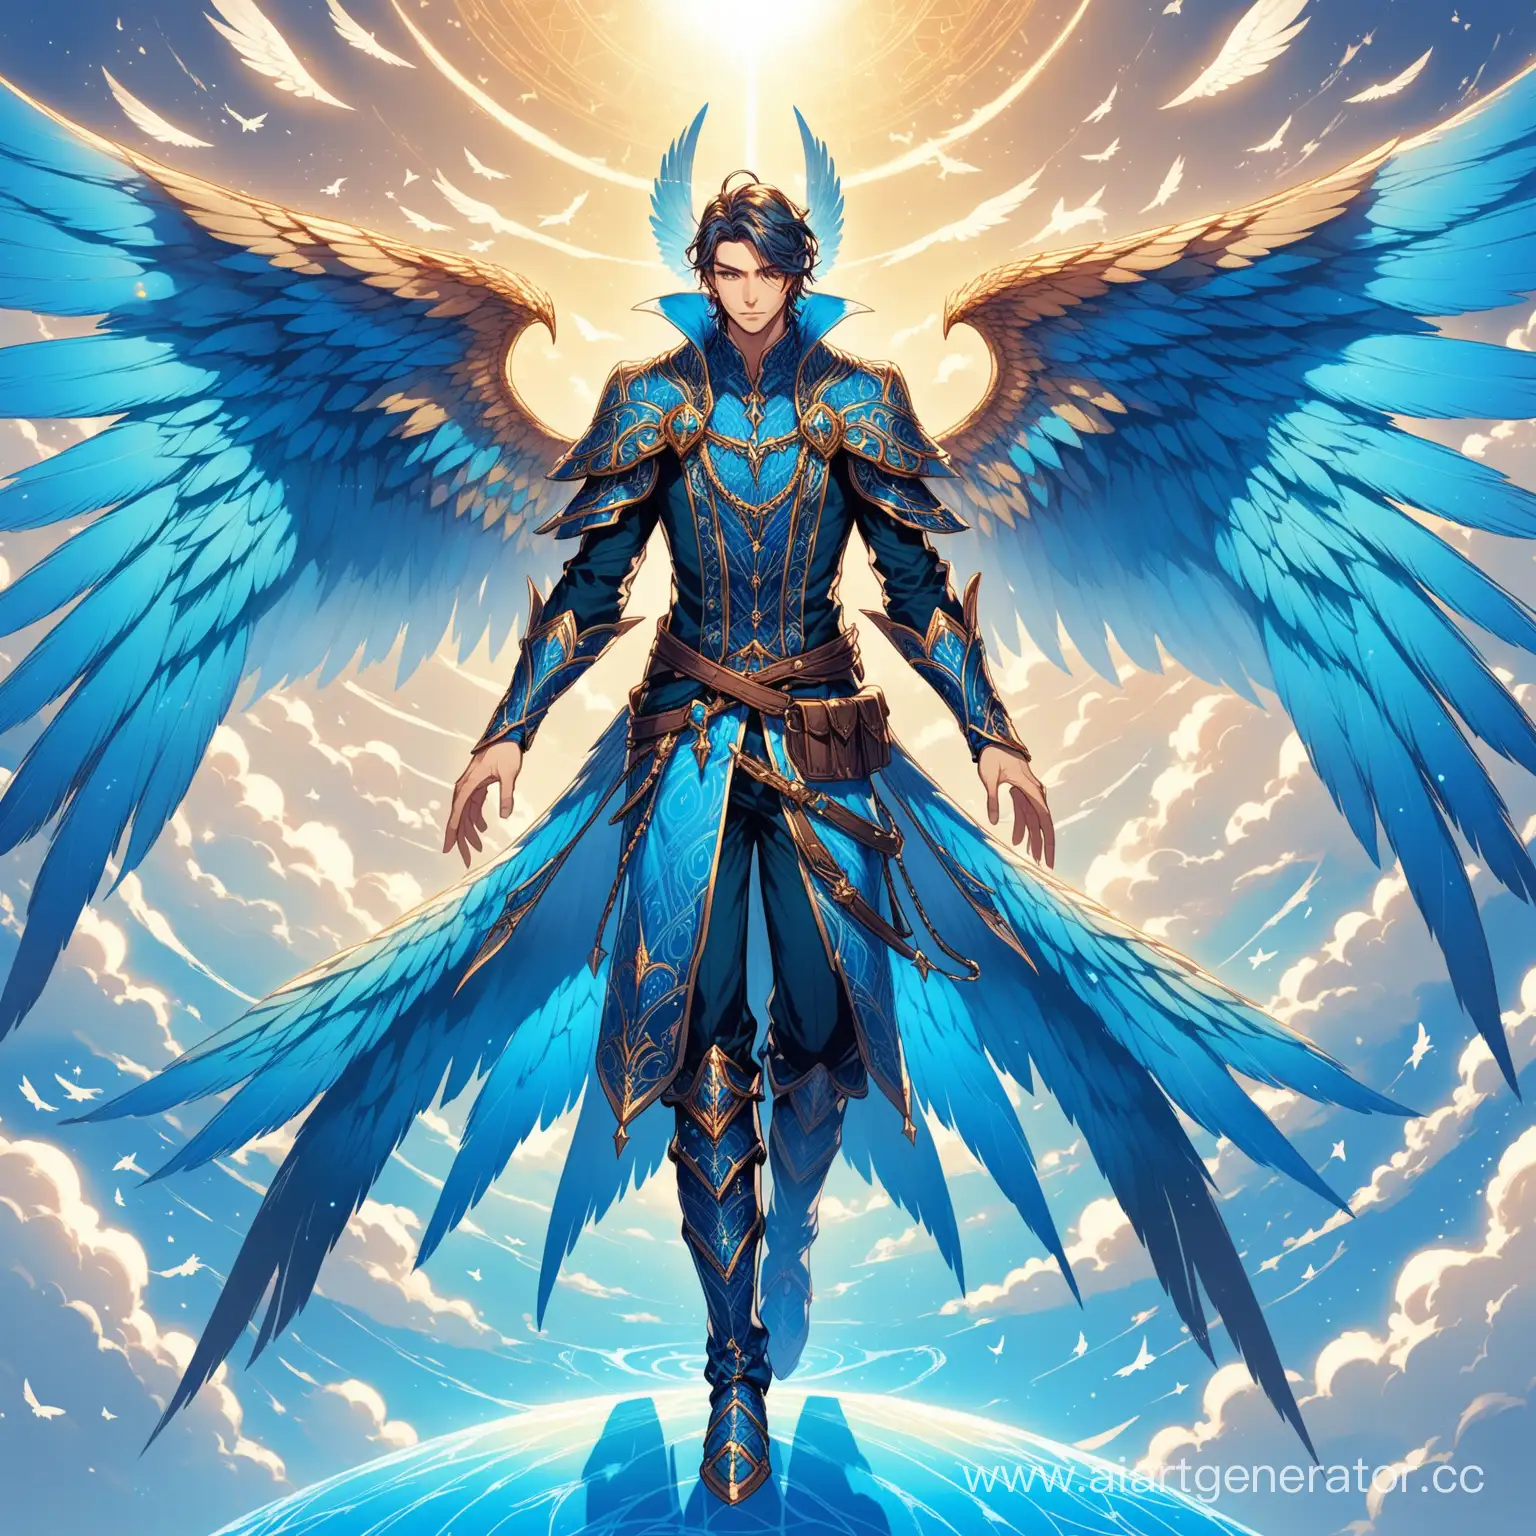 Fantasy-Man-in-Intricate-Blue-Outfit-with-Wings